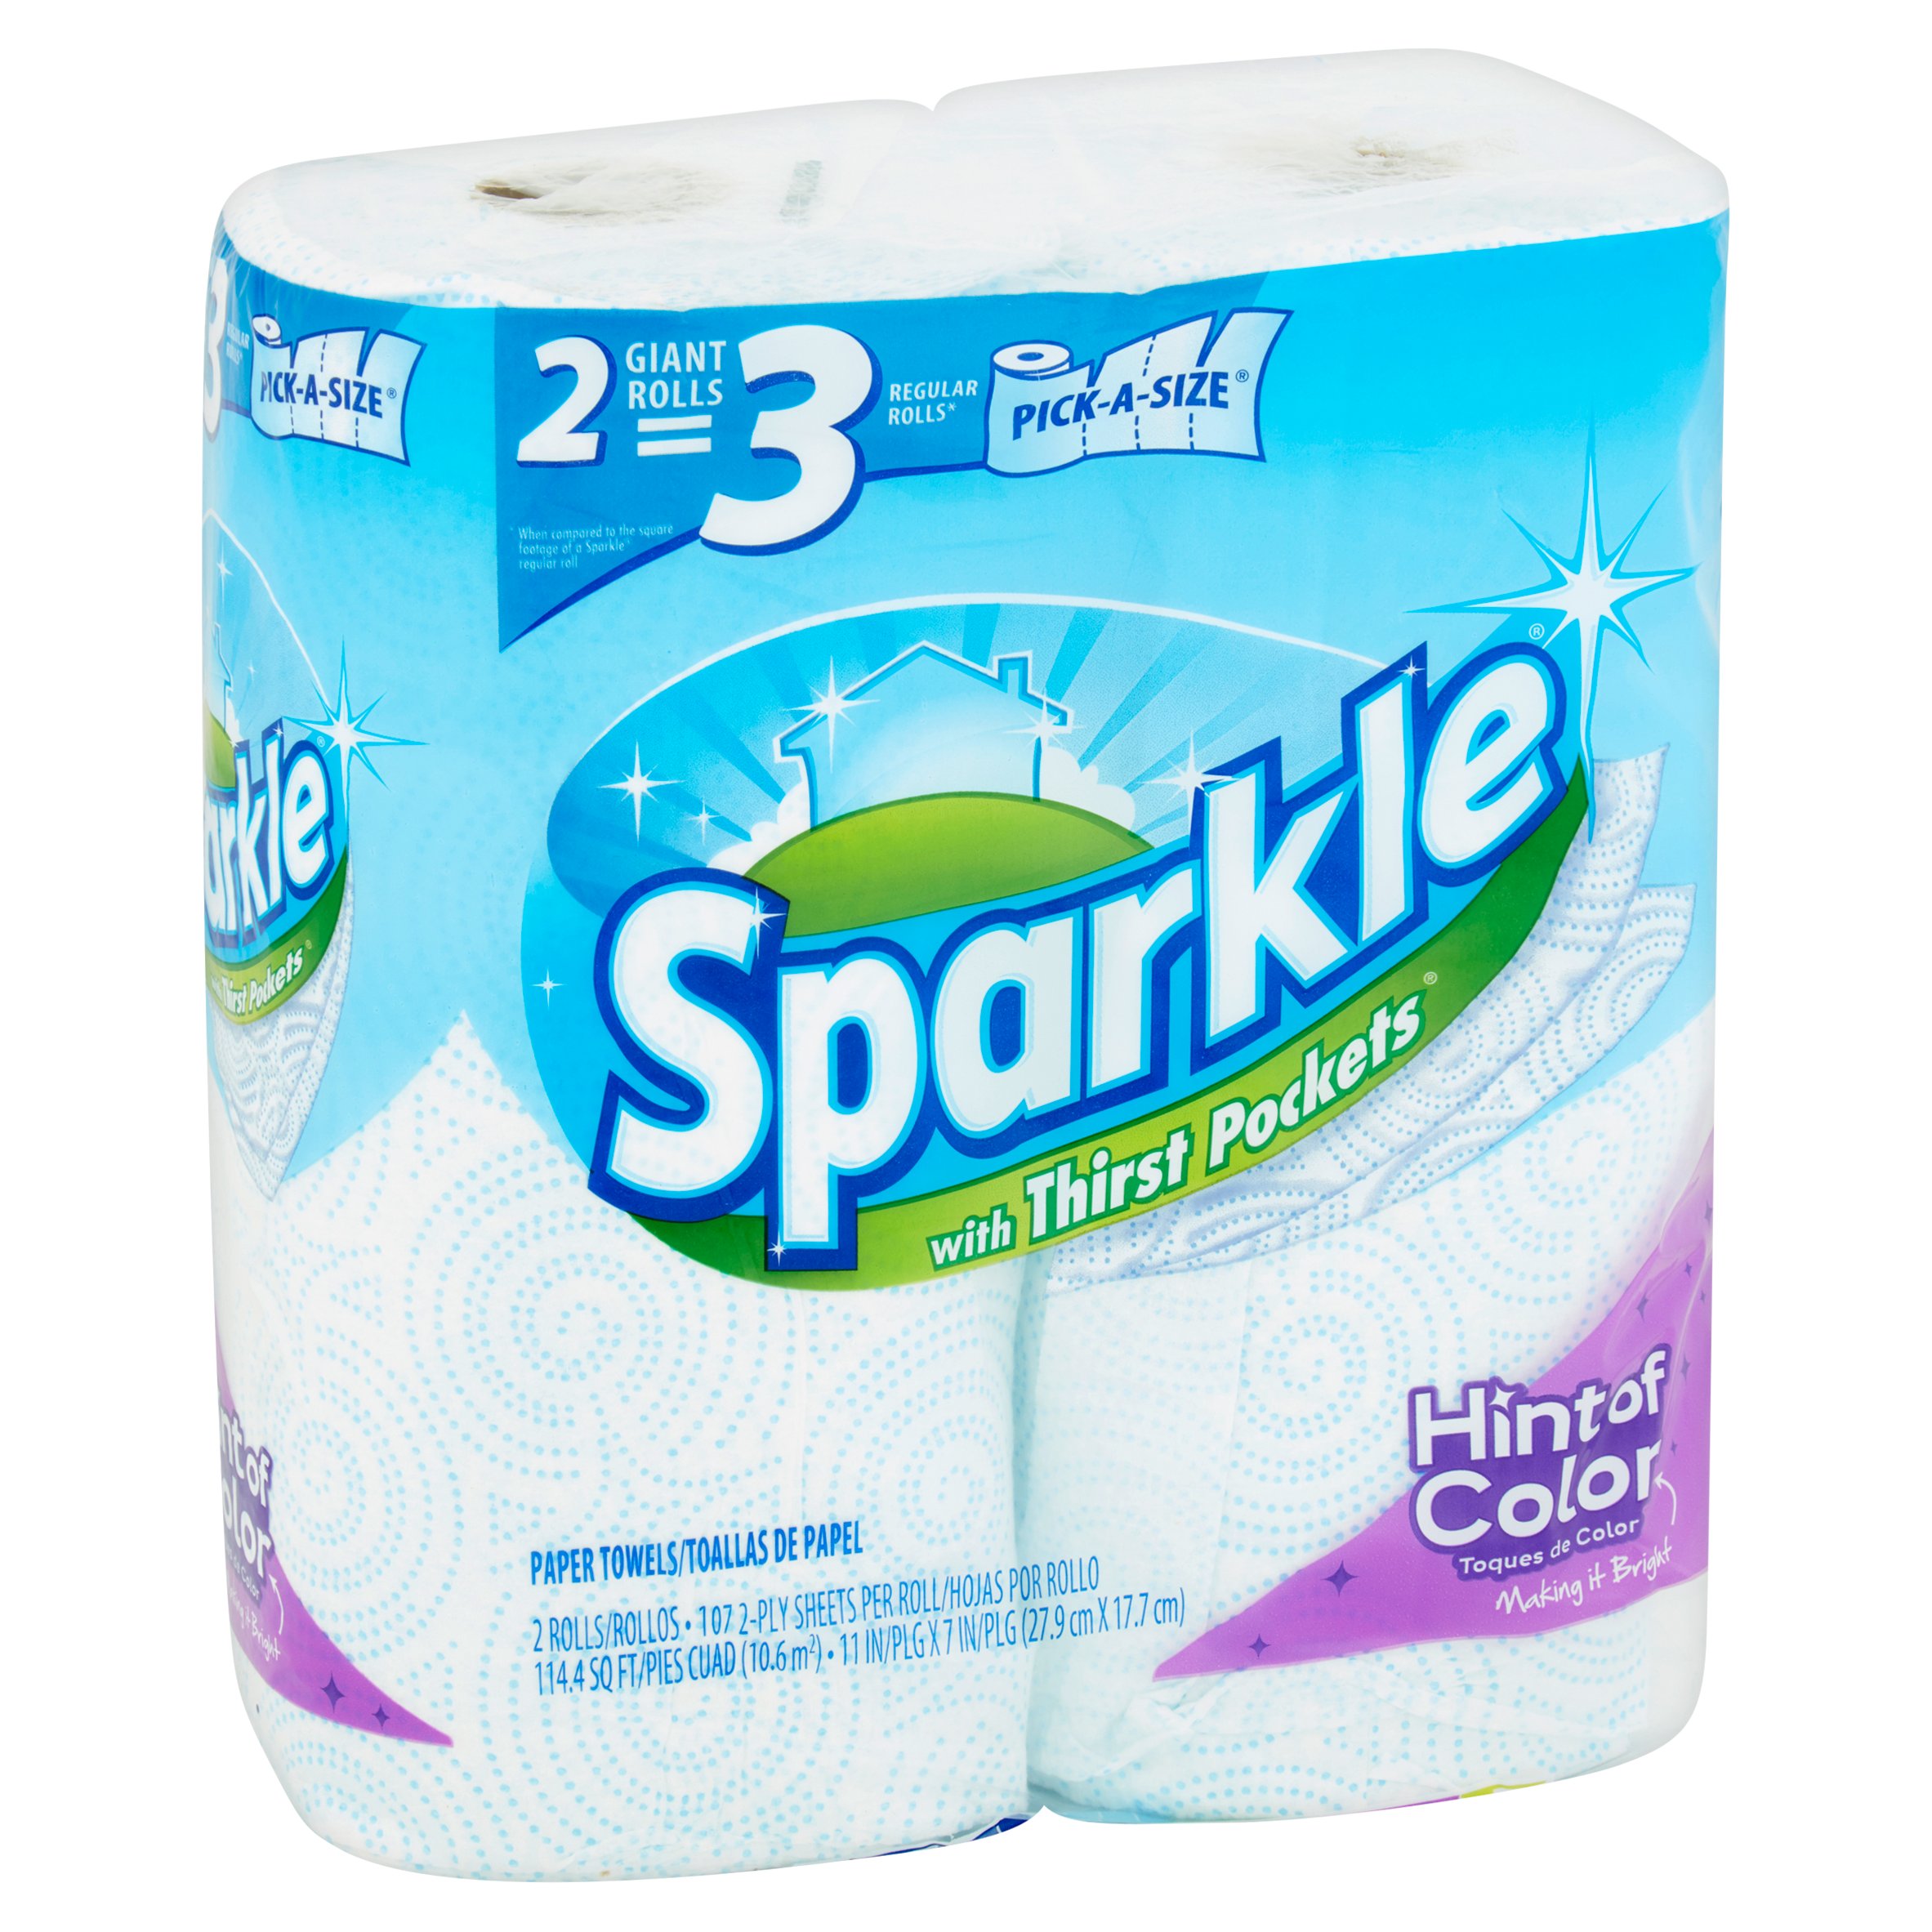 Sparkle Paper Towels with Thirst Pockets Rolls, 2 count - image 2 of 5